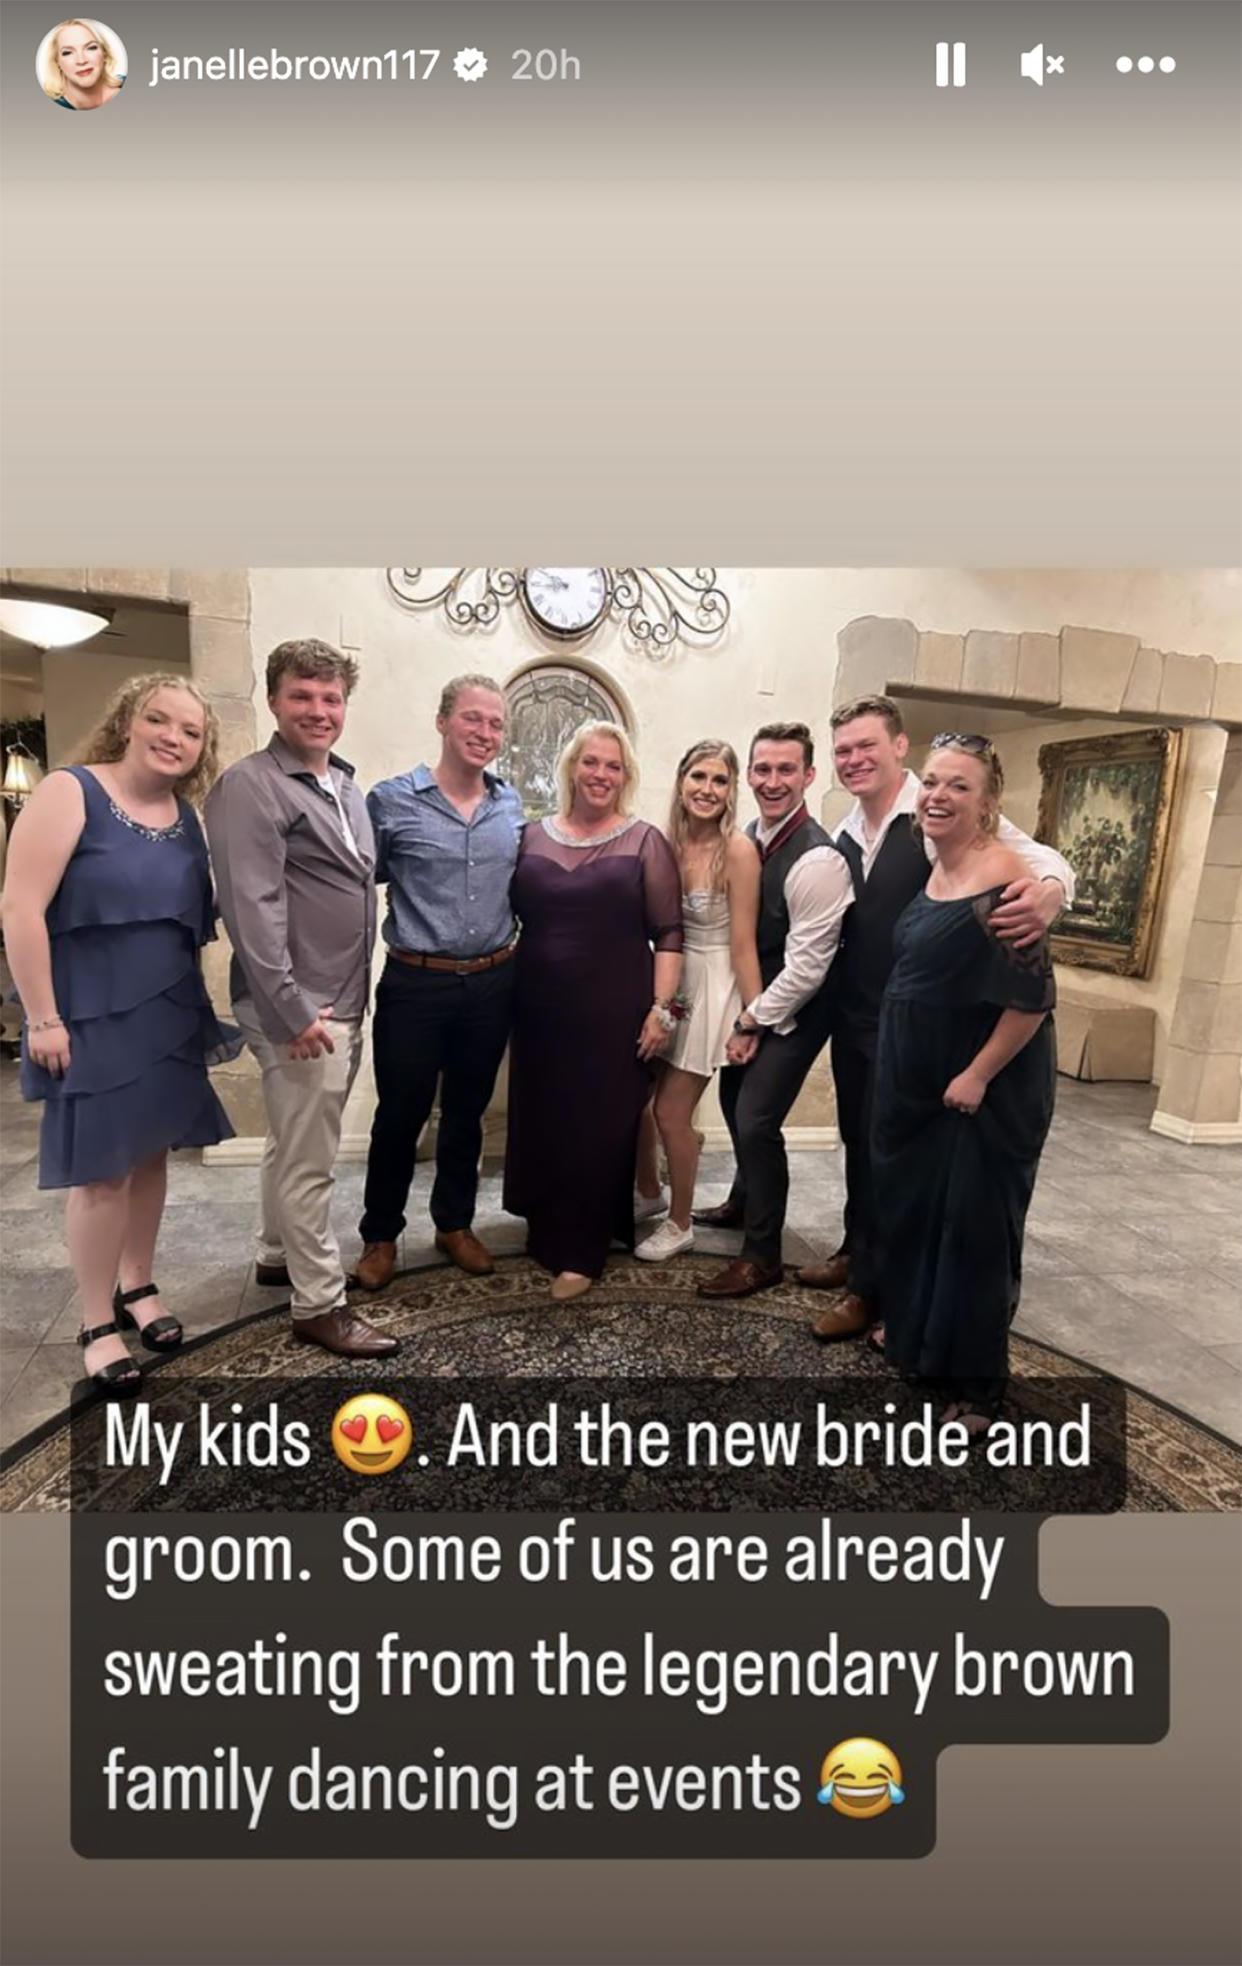 Janelle Brown and family at her son Logan's wedding. (@janellebrown117 via Instagram)